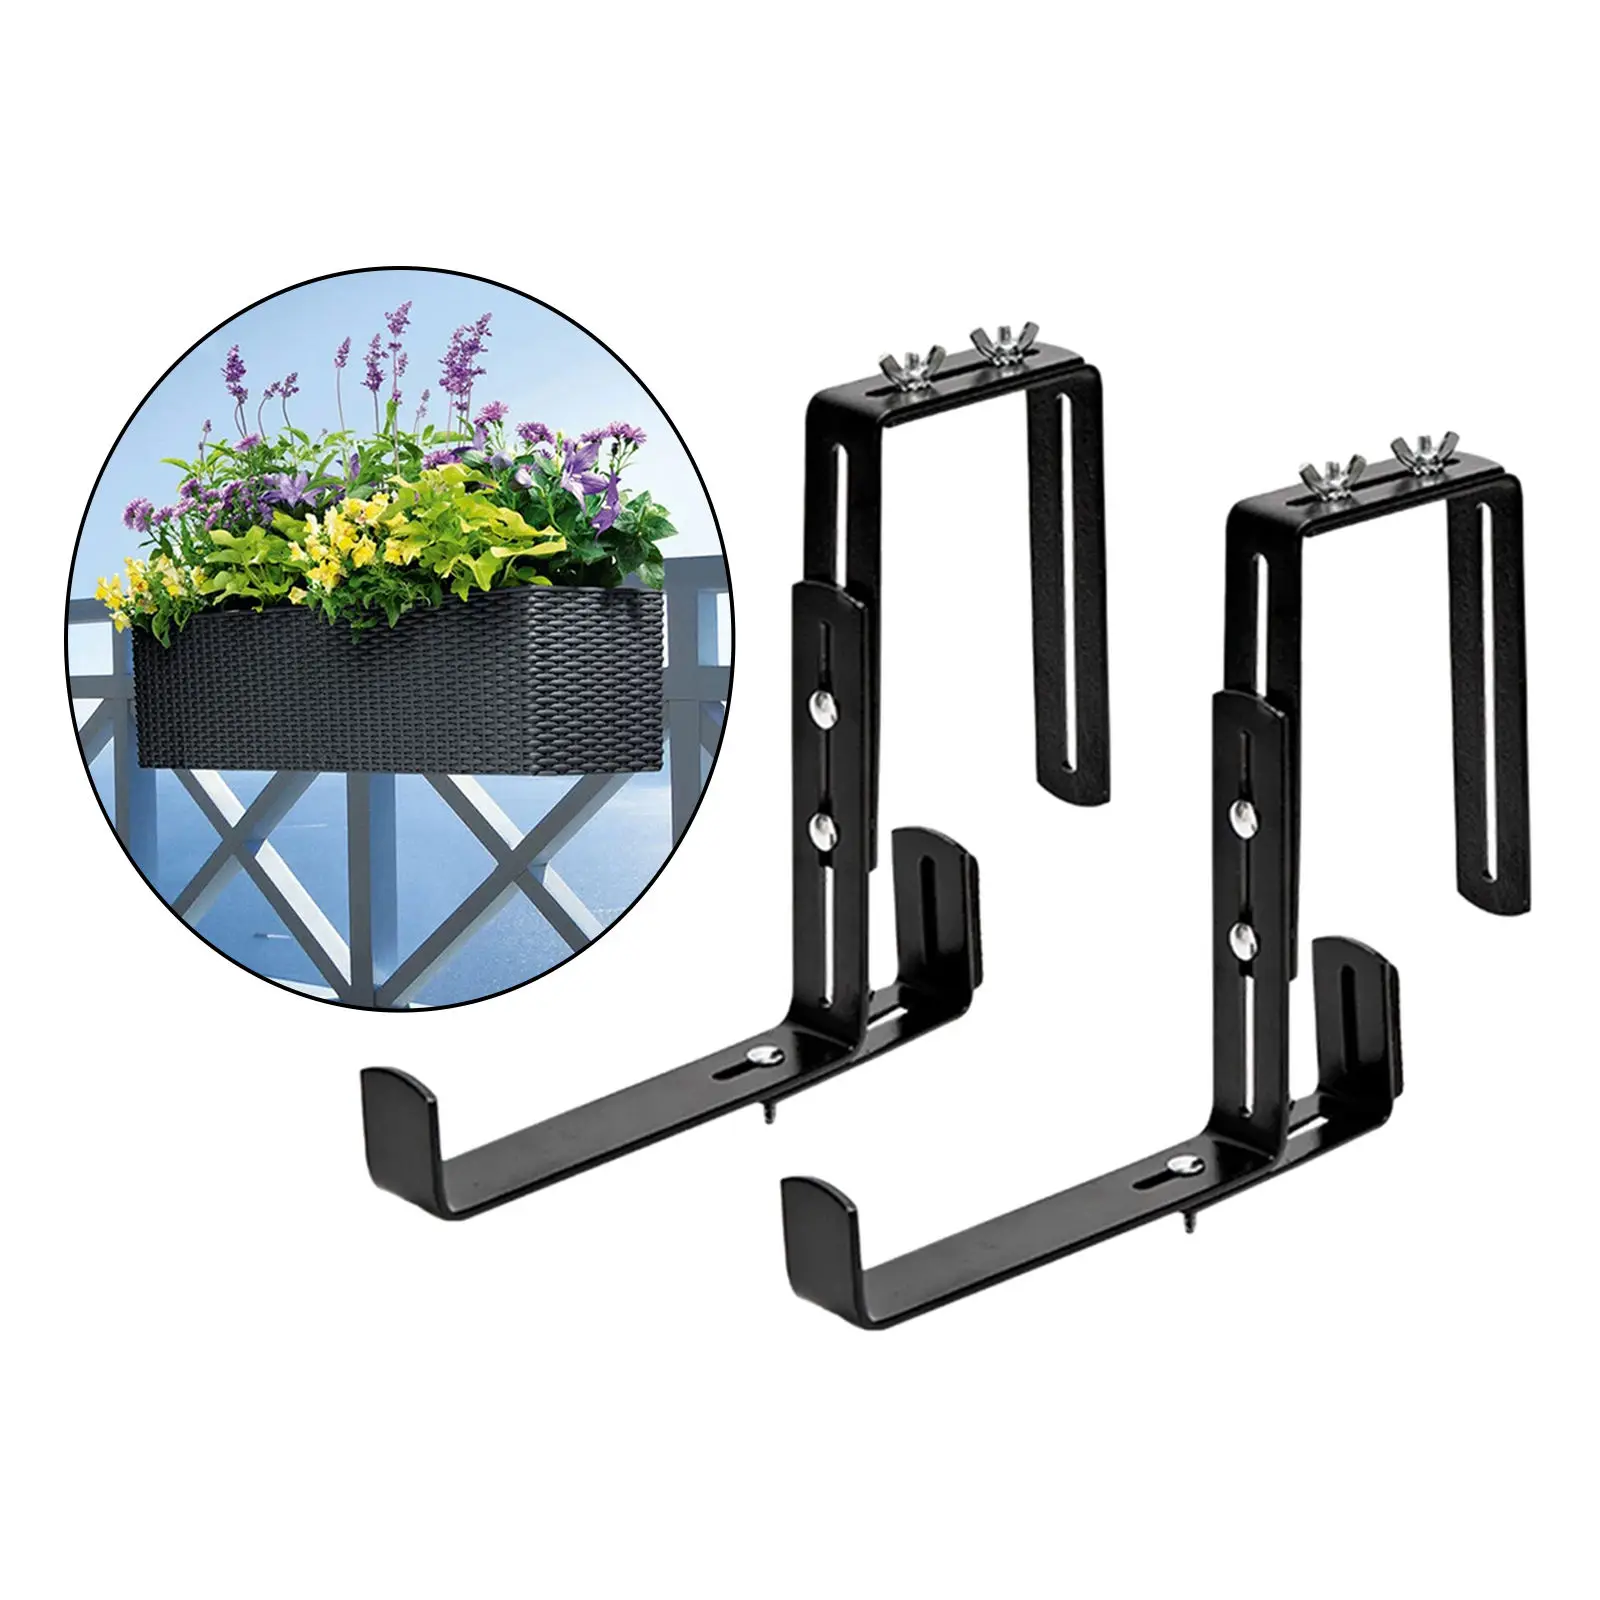 UPP Pot and Flowers Cantilever Set Hanging Cantilever Wall Bracket Wall Hook Flower Pot to 15kg 